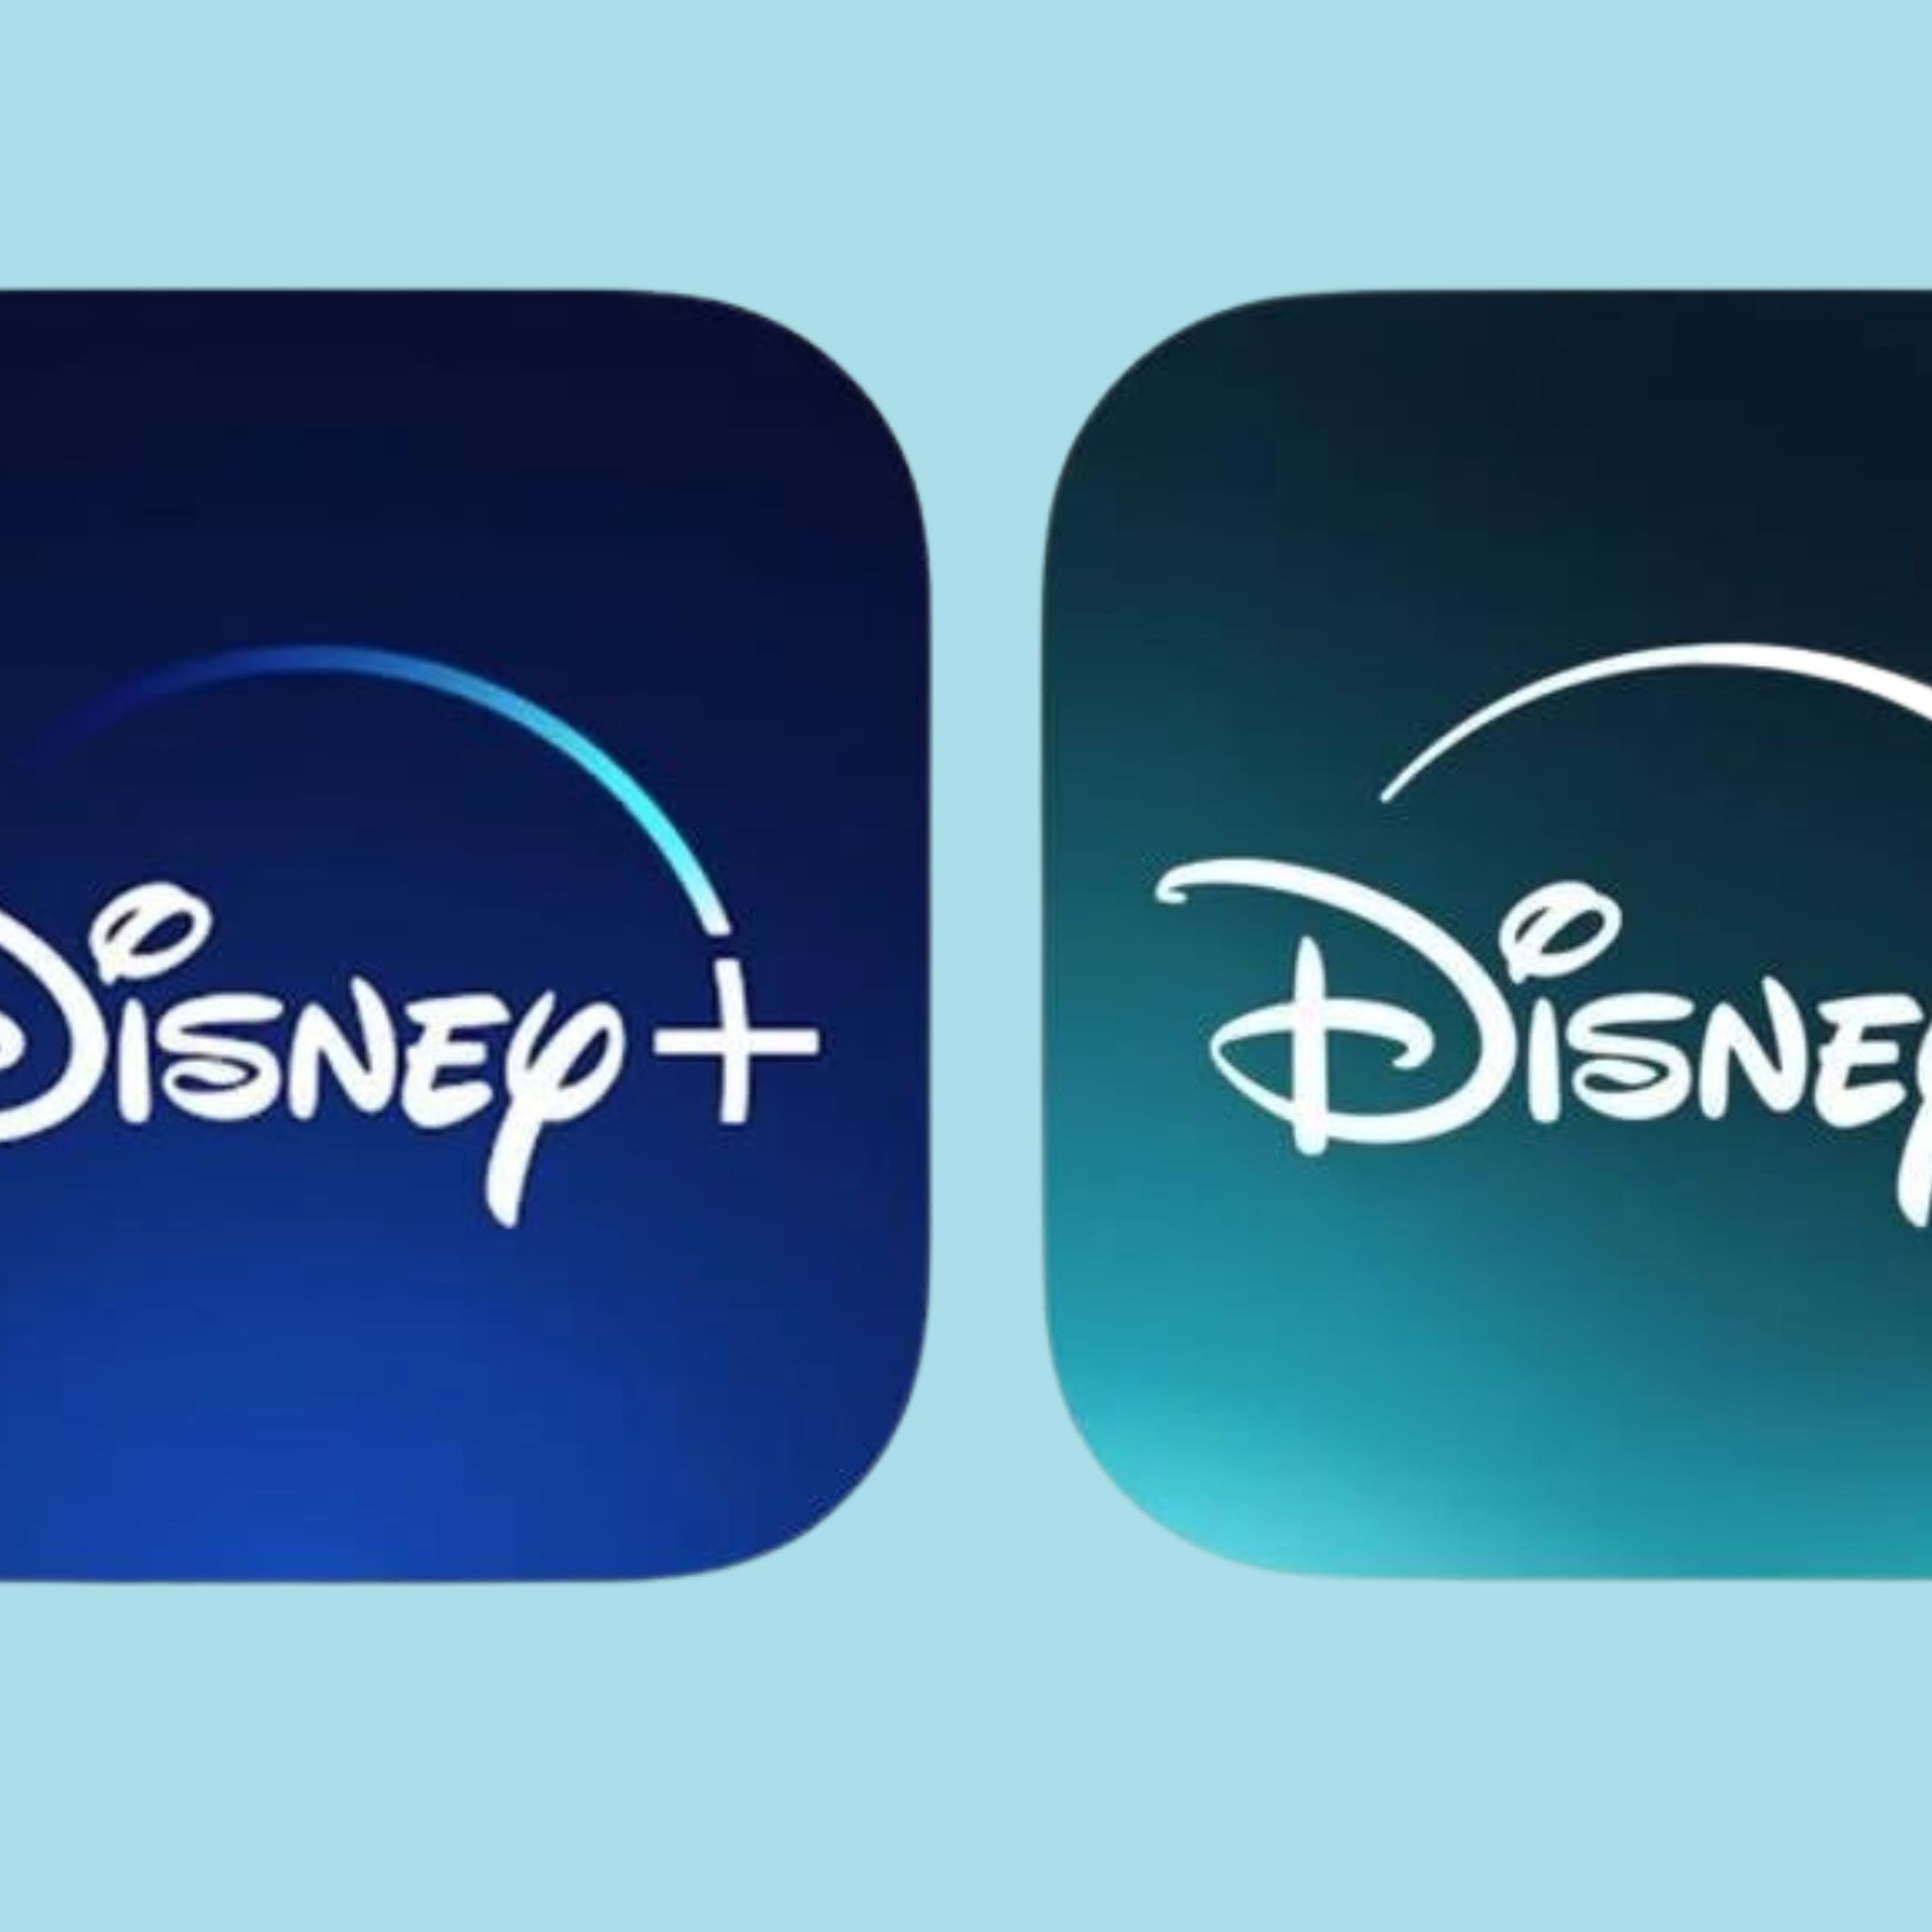 The old Disney Plus icon logo (left) compared with the updated teal one (right).